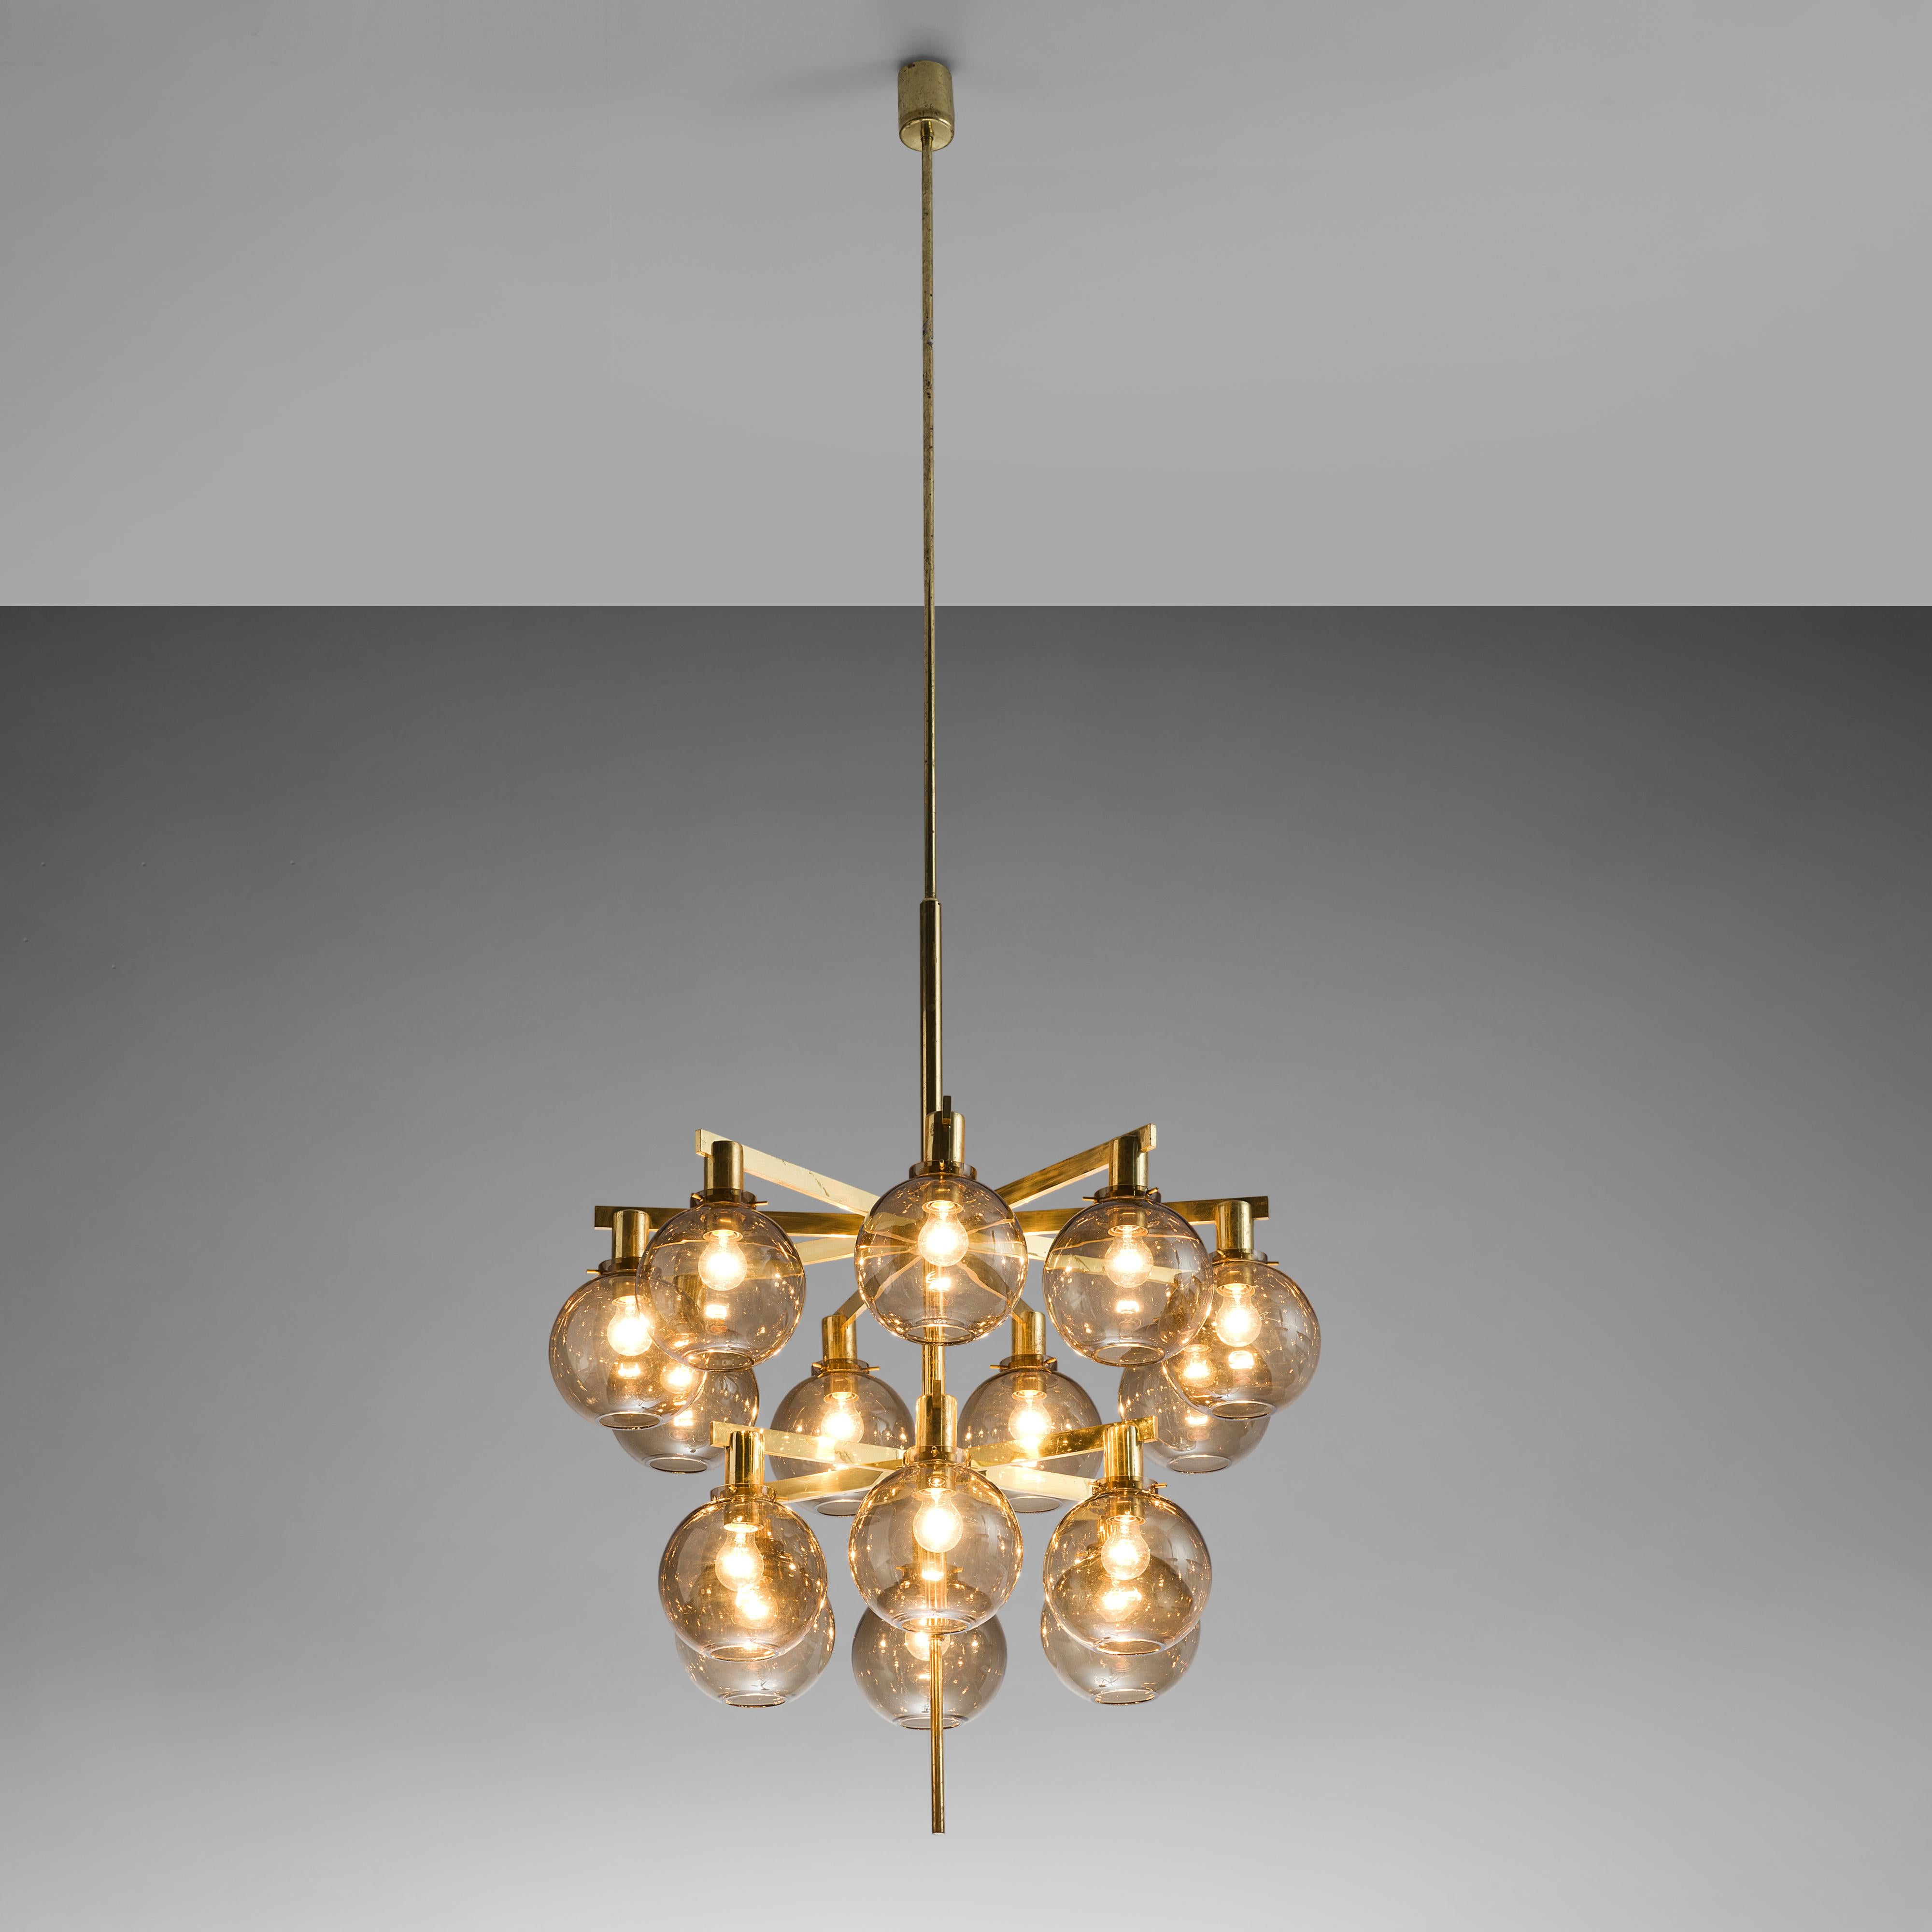 Hans-Agne Jakobsson, ‘Pastoral’ chandelier model T-348/6, brass, glass, Sweden, 1960s

This ceiling lamp model T348/15 called 'Pastoral' is designed by Hans-Agne Jakobsson. Multiple glass spheres are arranged in circles on two levels. The soft